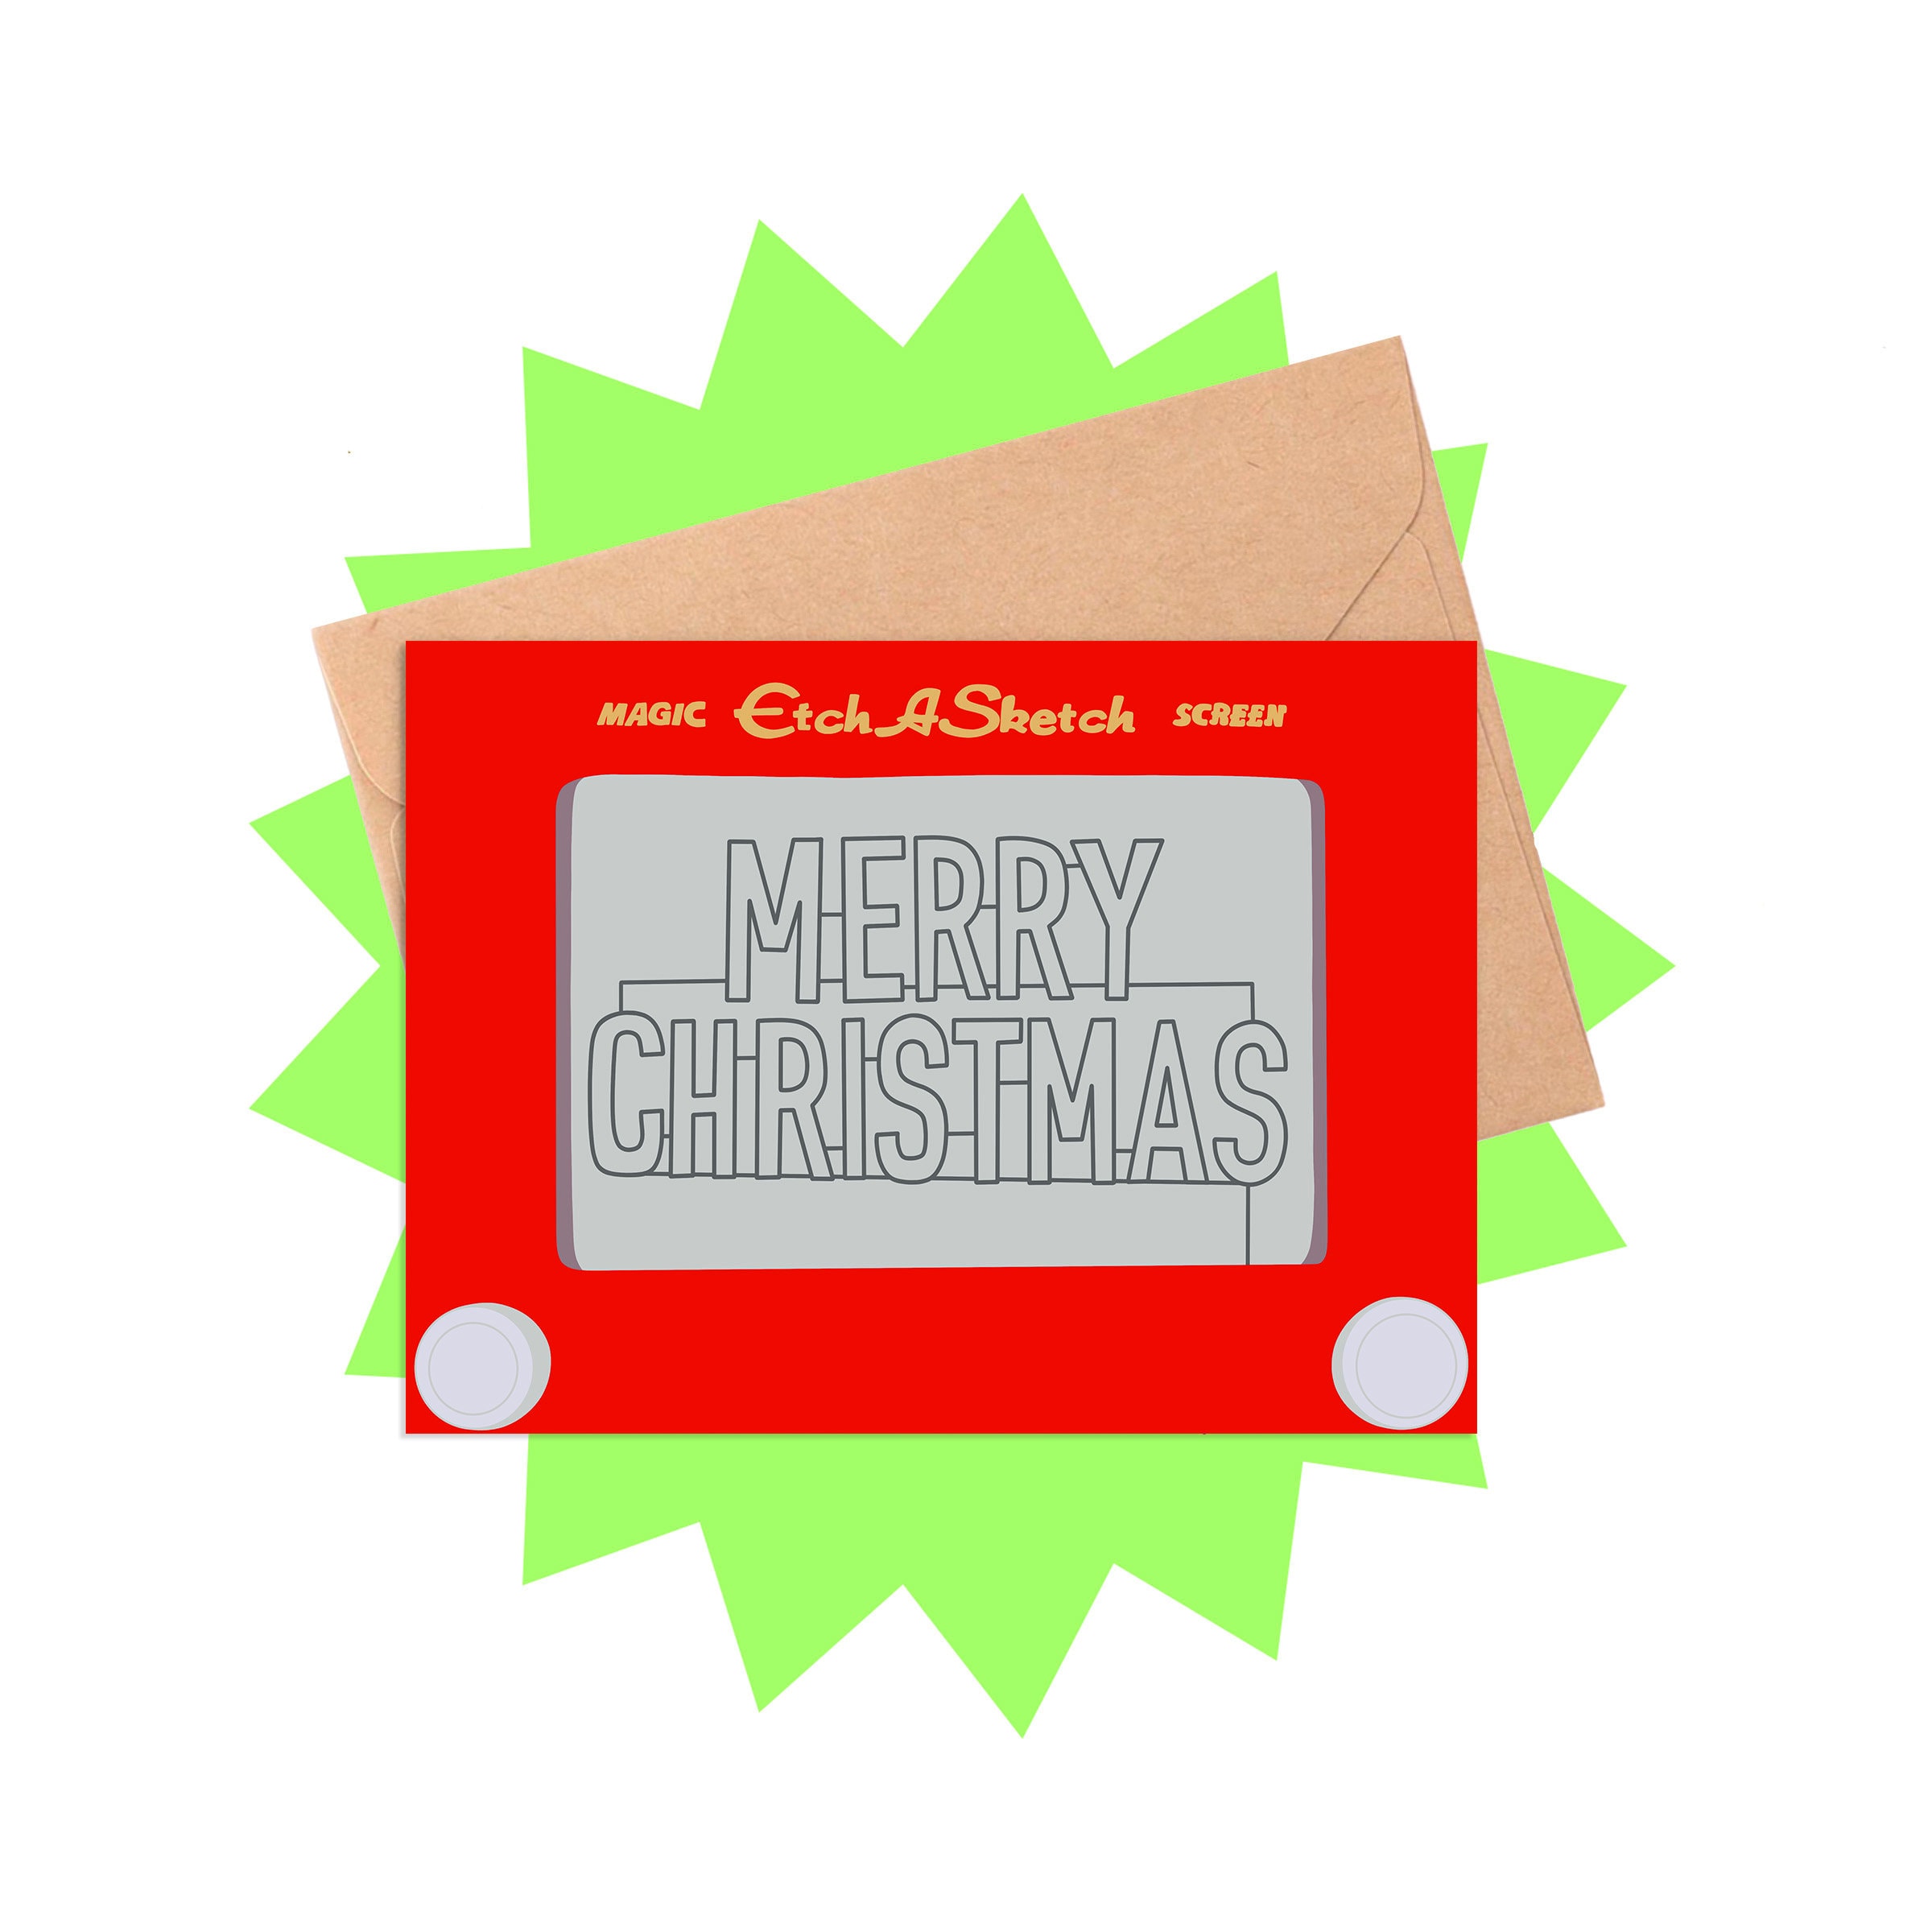 Etch A Sketch Merry Christmas Card, Classic Toy Christmas Card, Funny  Christmas Card, Nostalgic Christmas Card, Christmas Card for Parents 